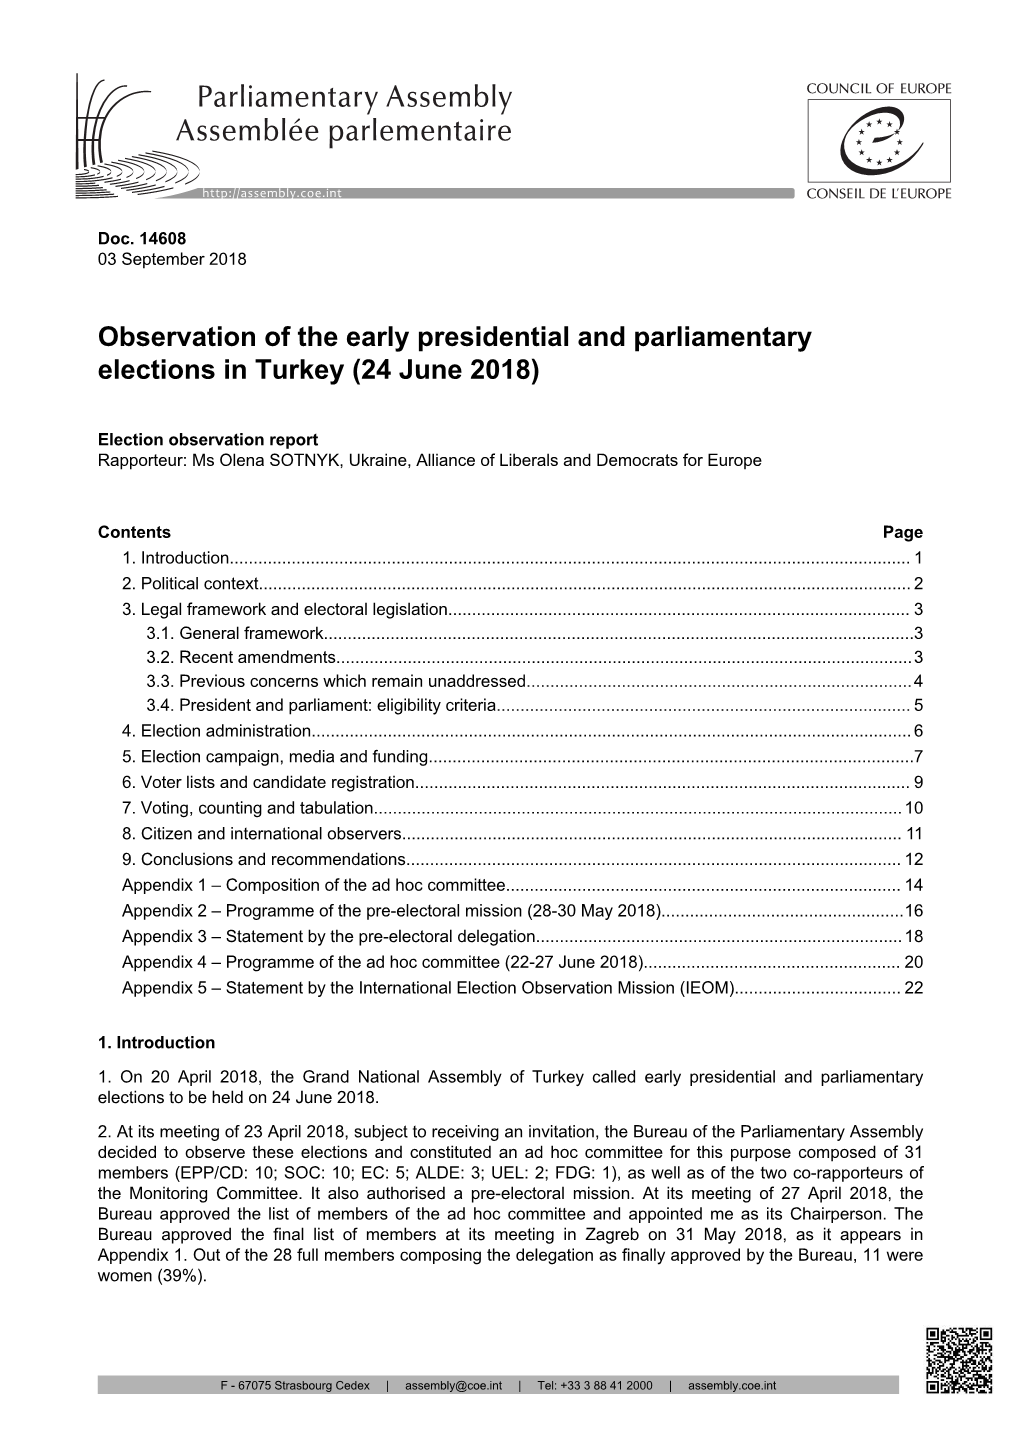 Observation of the Early Presidential and Parliamentary Elections in Turkey (24 June 2018)